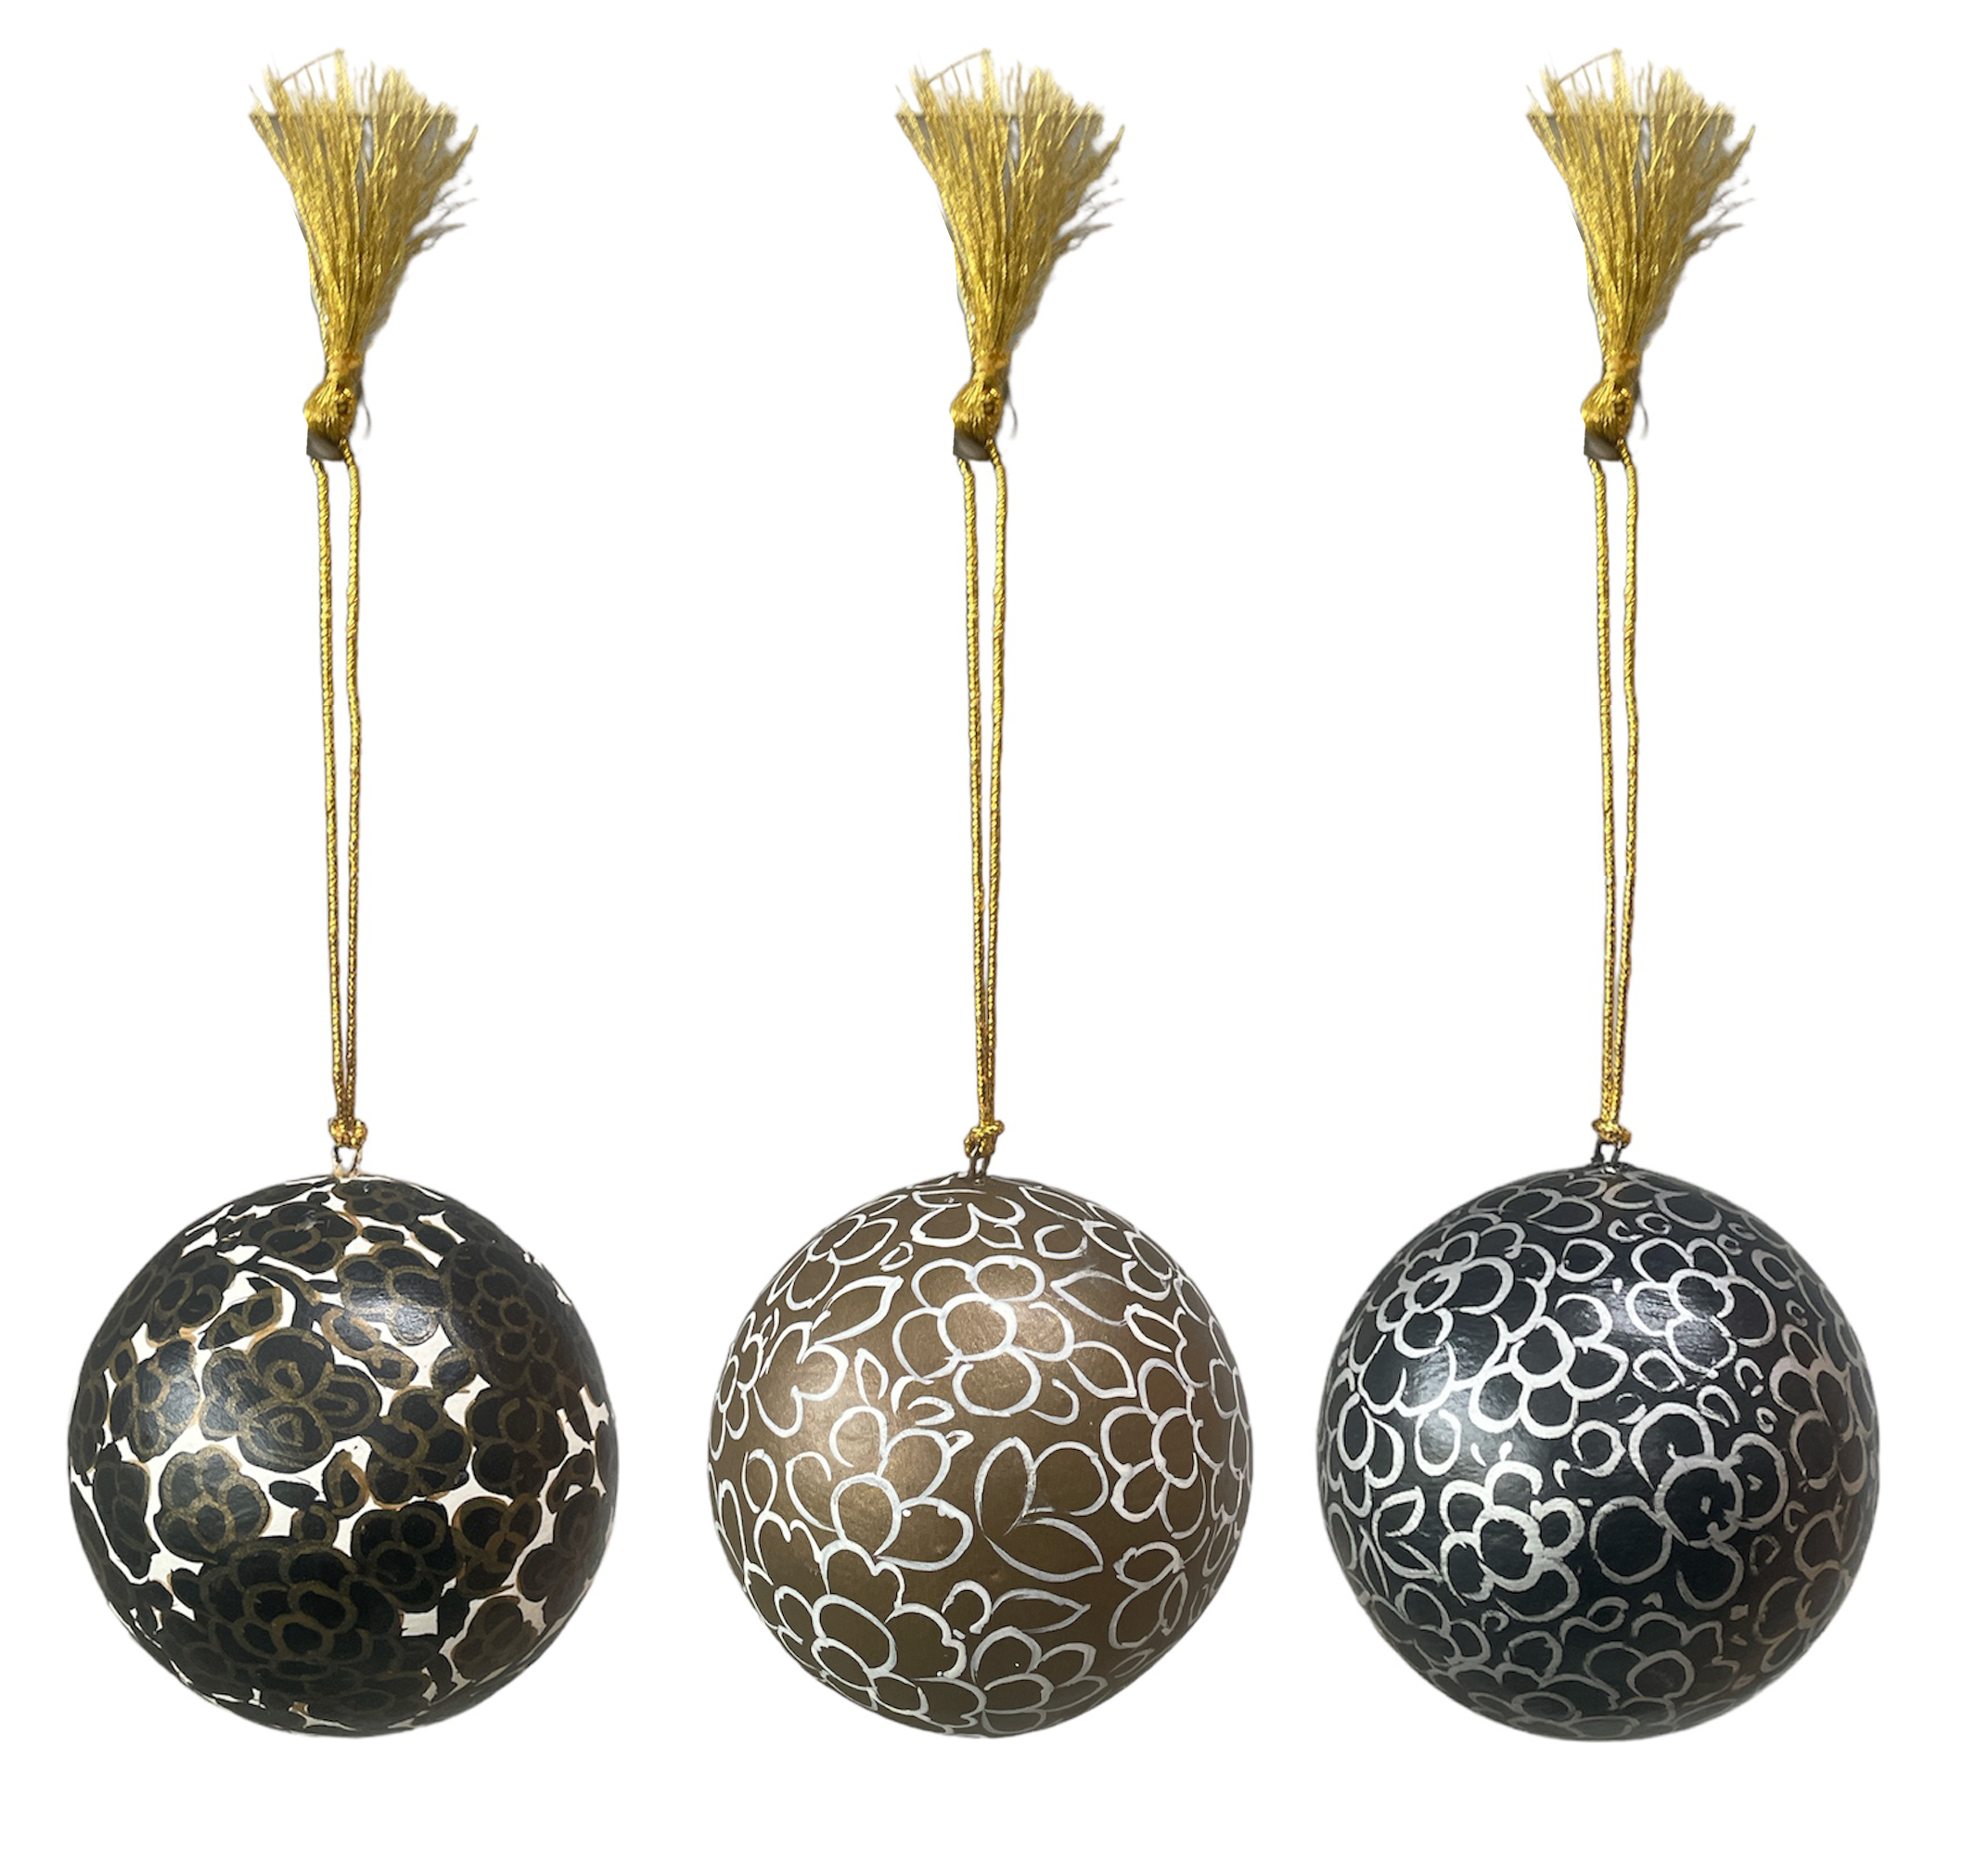 Handpainted Black Gold Silver Baubles Set Of 3 Assorted 7.5cm Set A Gift